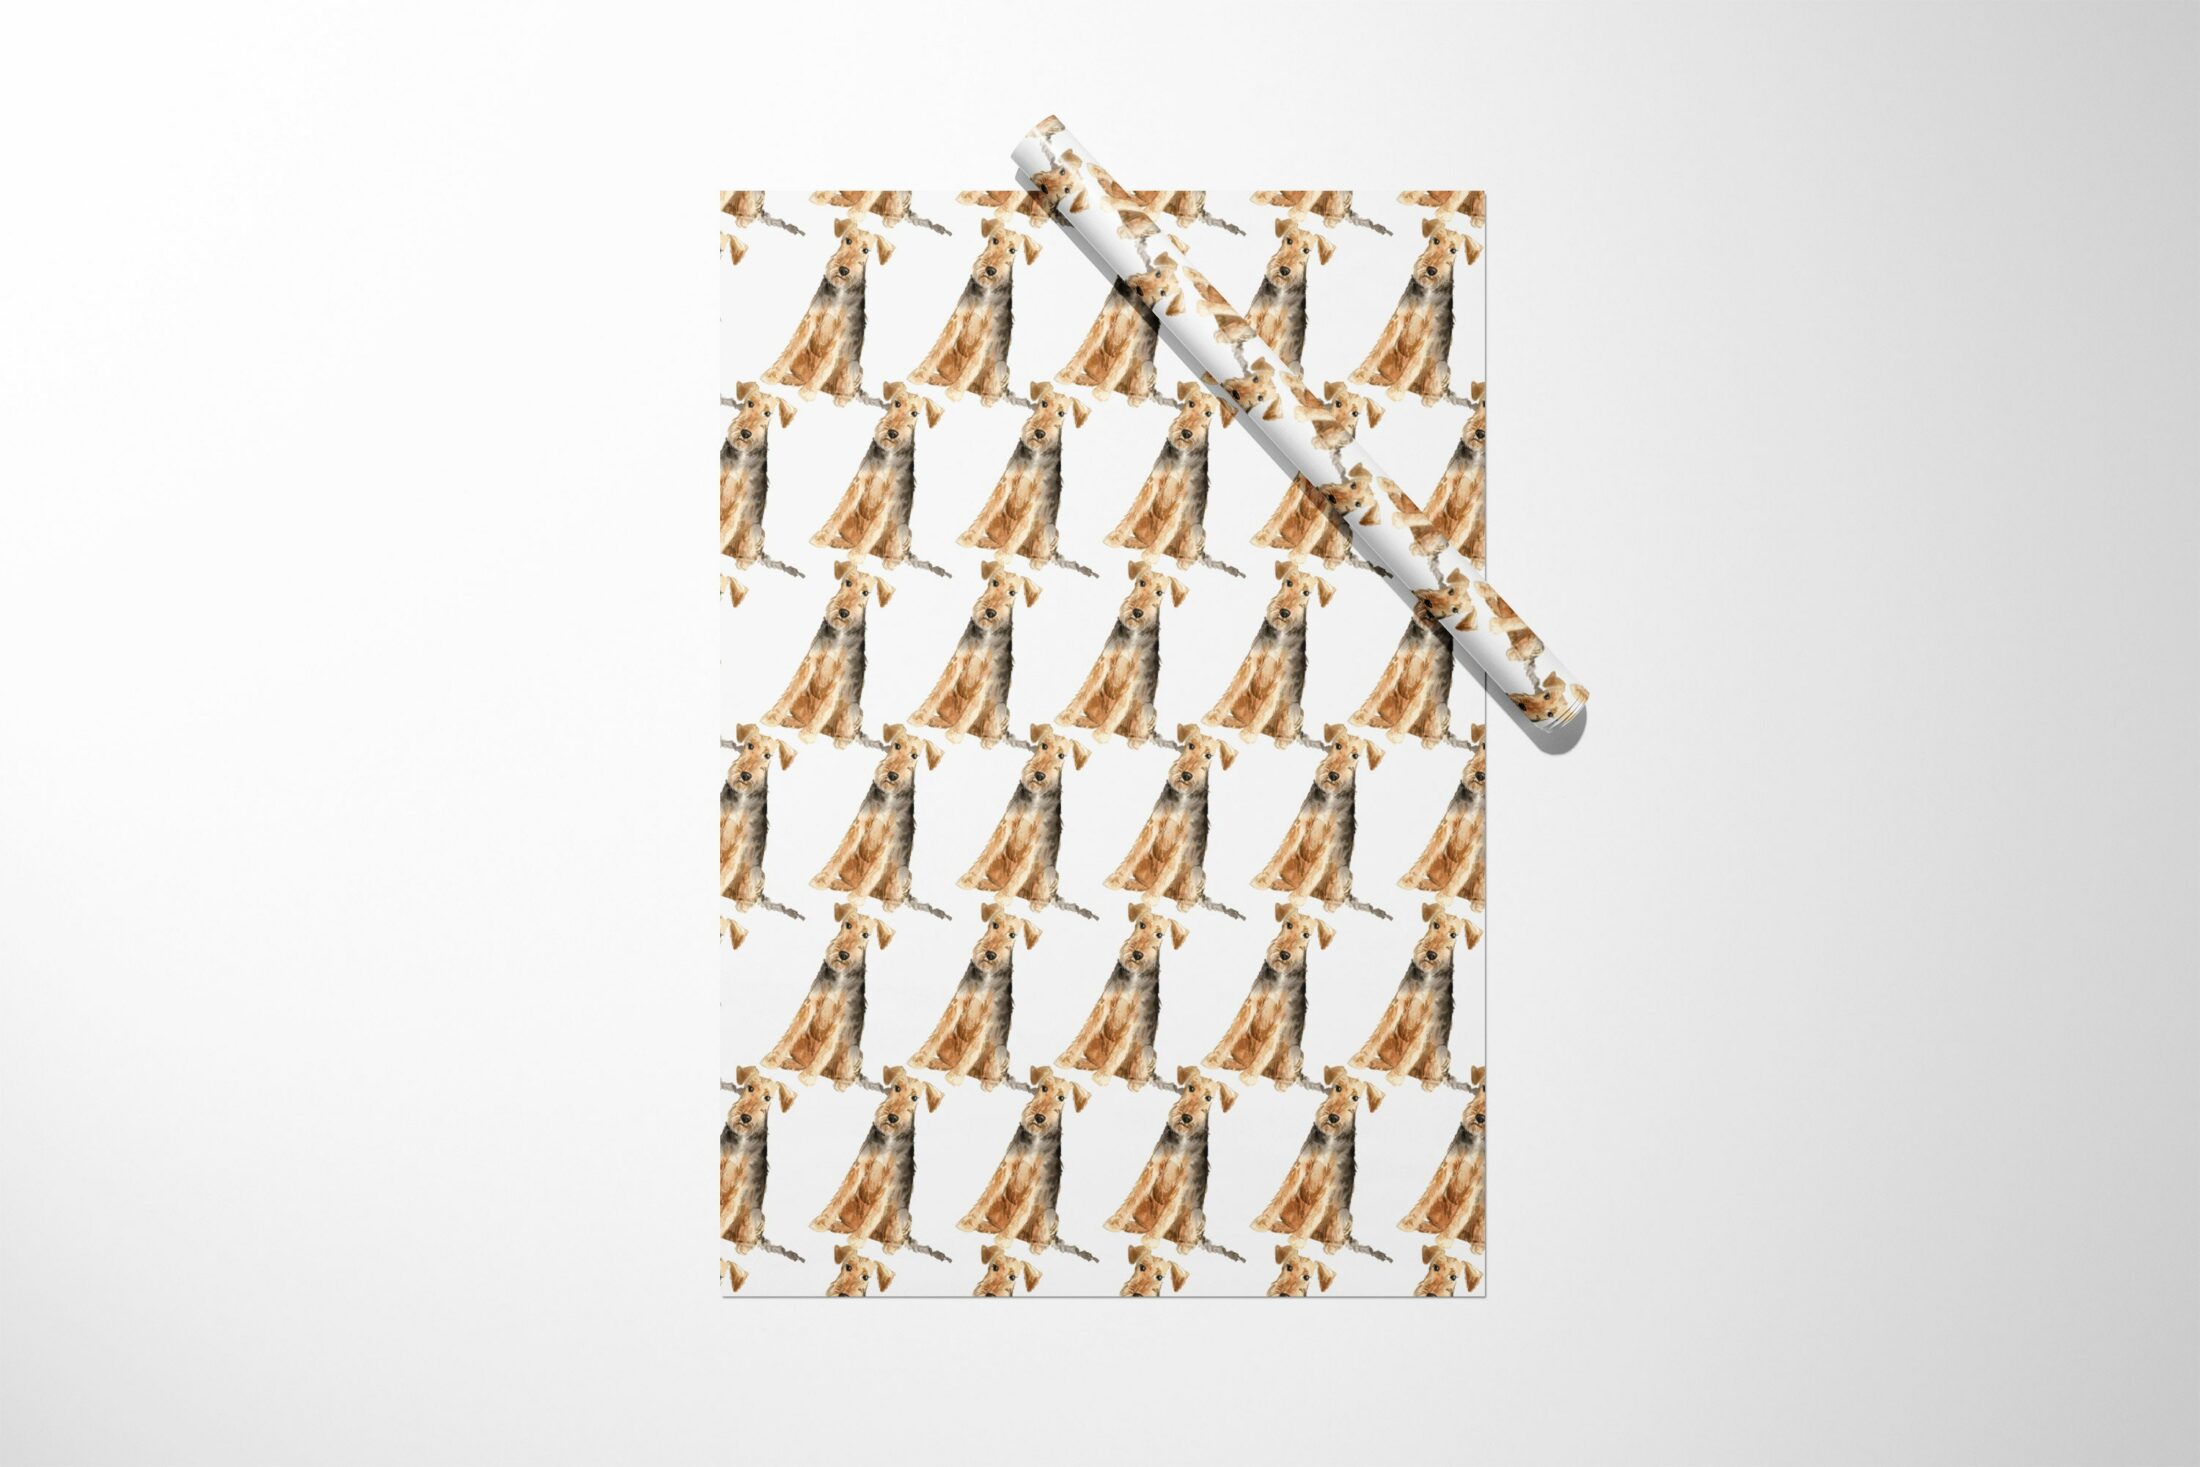 Welsh Terrier Dog Wrapping Paper featuring a Welsh Terrier dog.Product Name: Welsh Terrier Dog Wrapping Paper || Christmas Wrapping Paper Birthday Bridal Baby Shower Wedding Gift Unique For Her Him Girl Boy 03-016-564